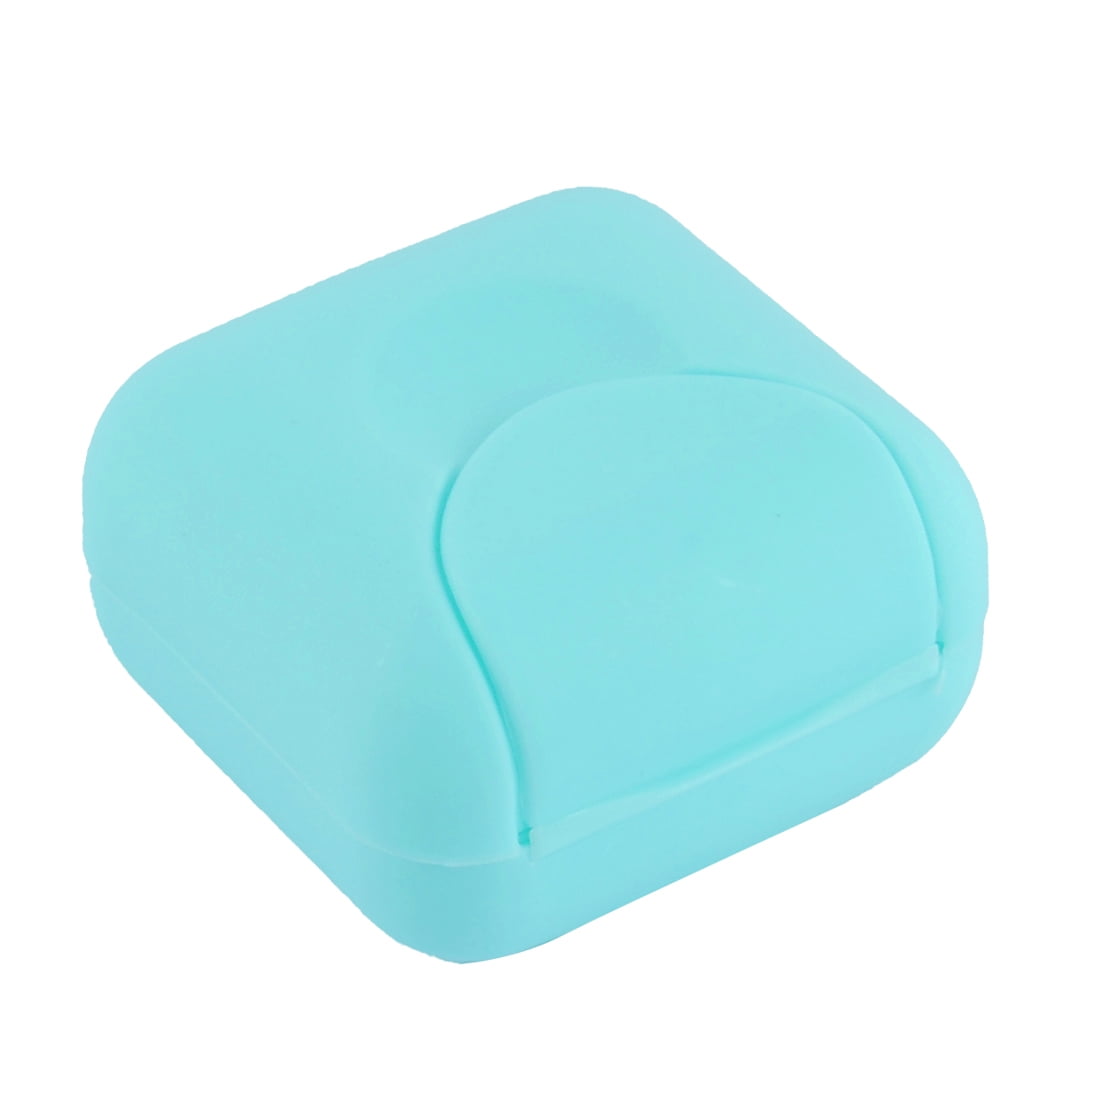 Wash Shower Home Camping Travel Soap Dish Box Case Container Holder 